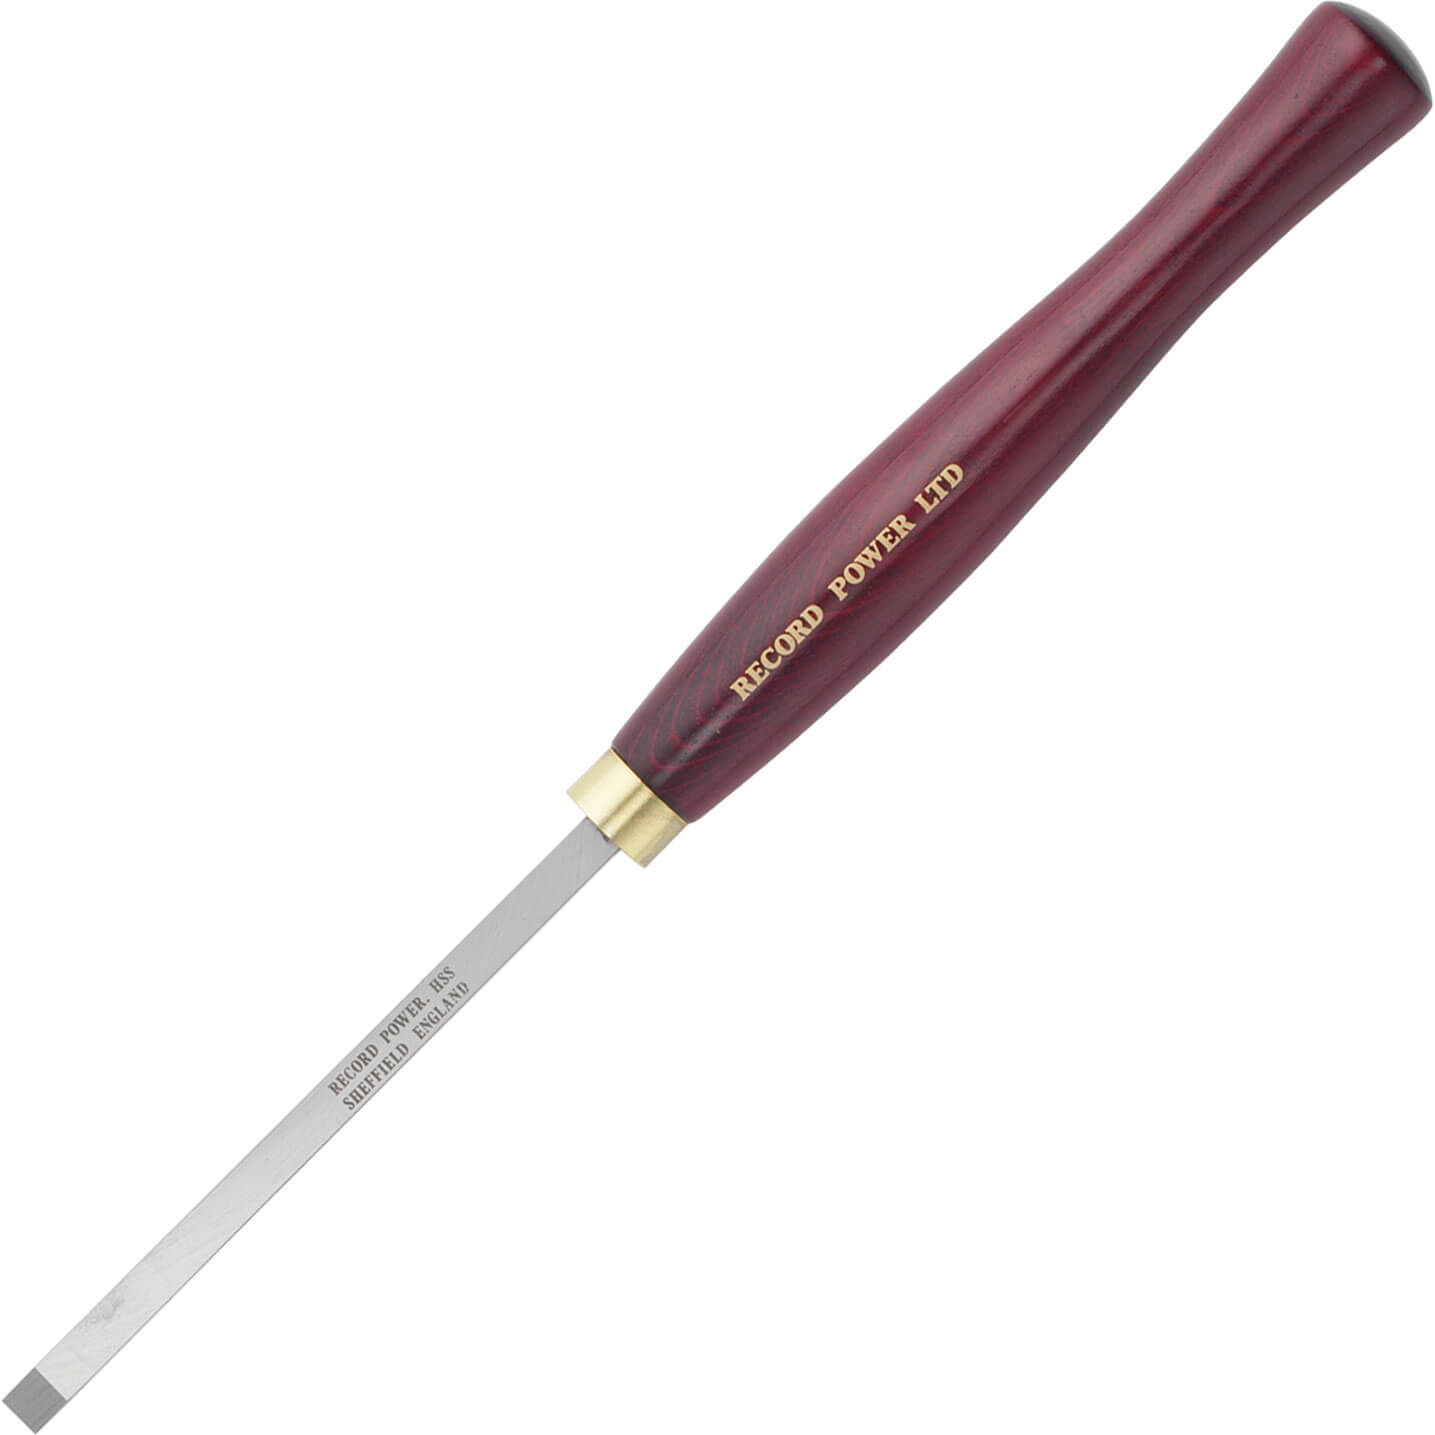 Record Parting & Beading Tool With Short Handle 3/8"